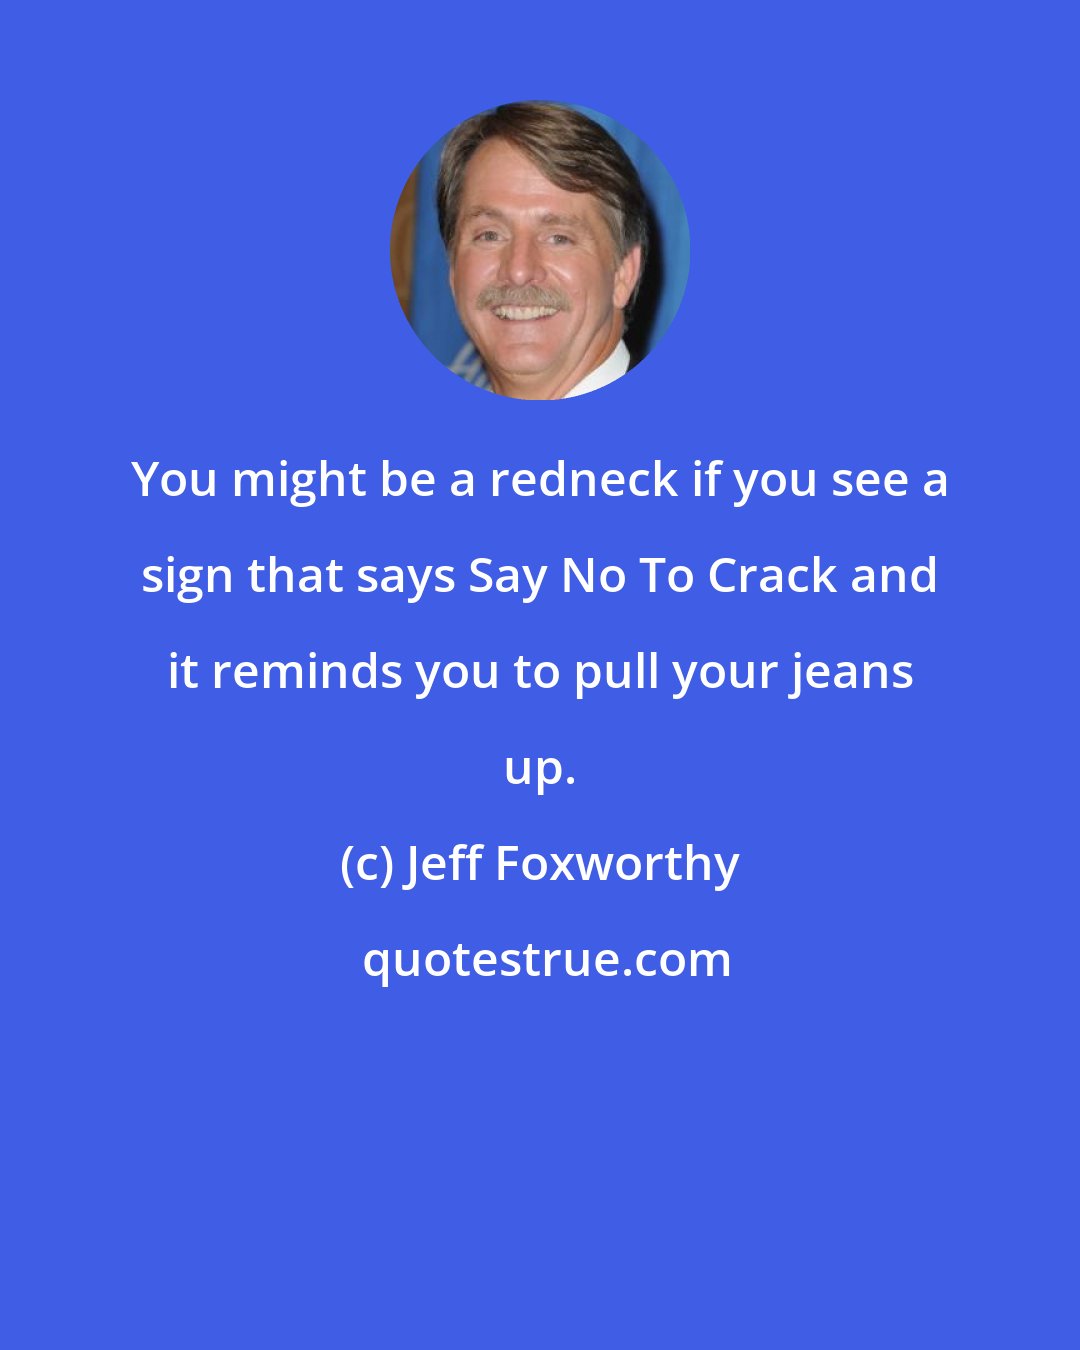 Jeff Foxworthy: You might be a redneck if you see a sign that says Say No To Crack and it reminds you to pull your jeans up.